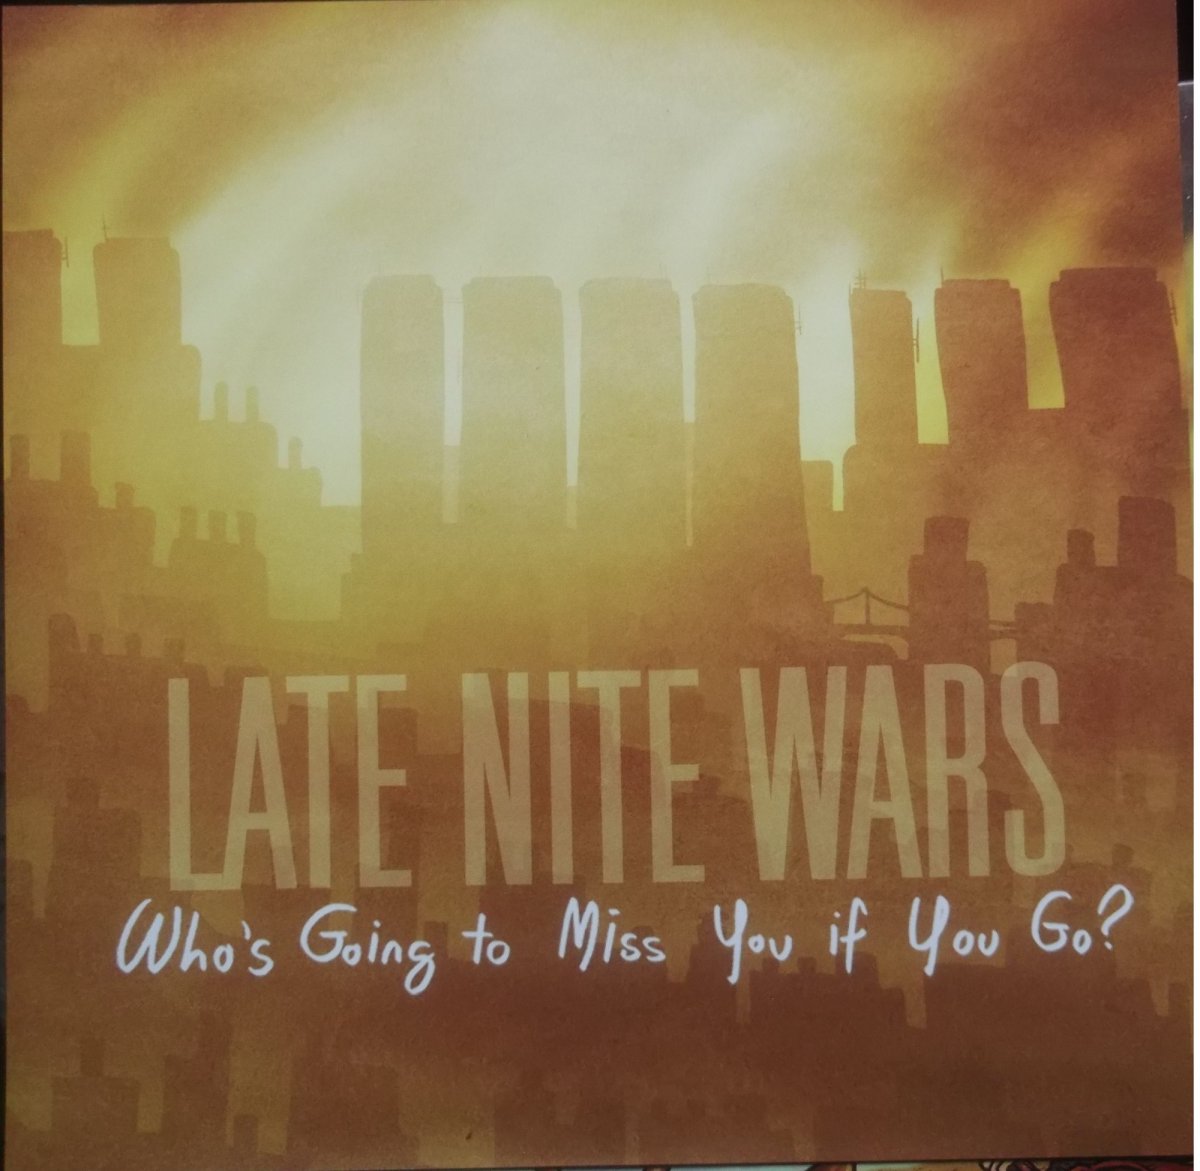 Late Nite Wars – Who's Going To Miss You If You Go